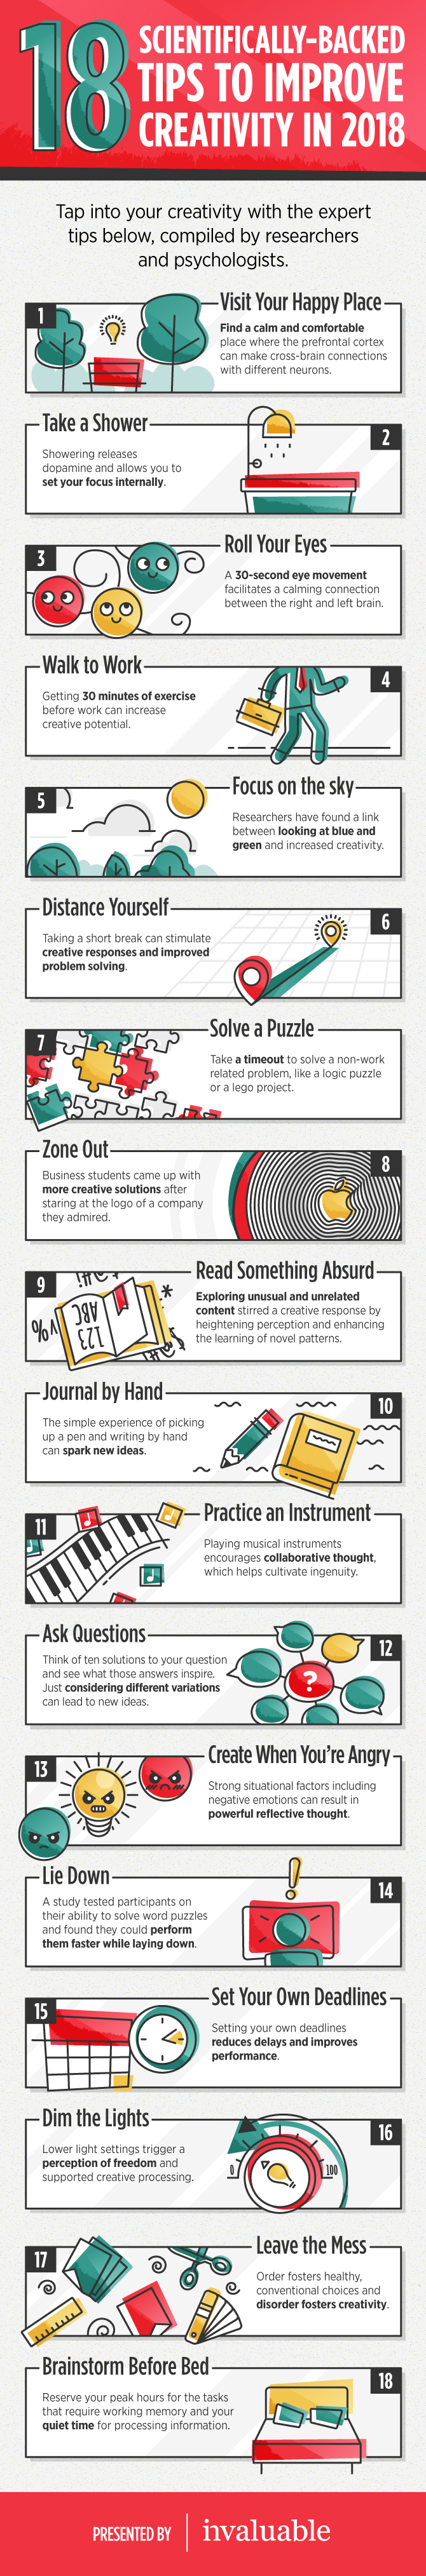 18 Scientifically-Backed Tips to Improve Creativity - #infographic